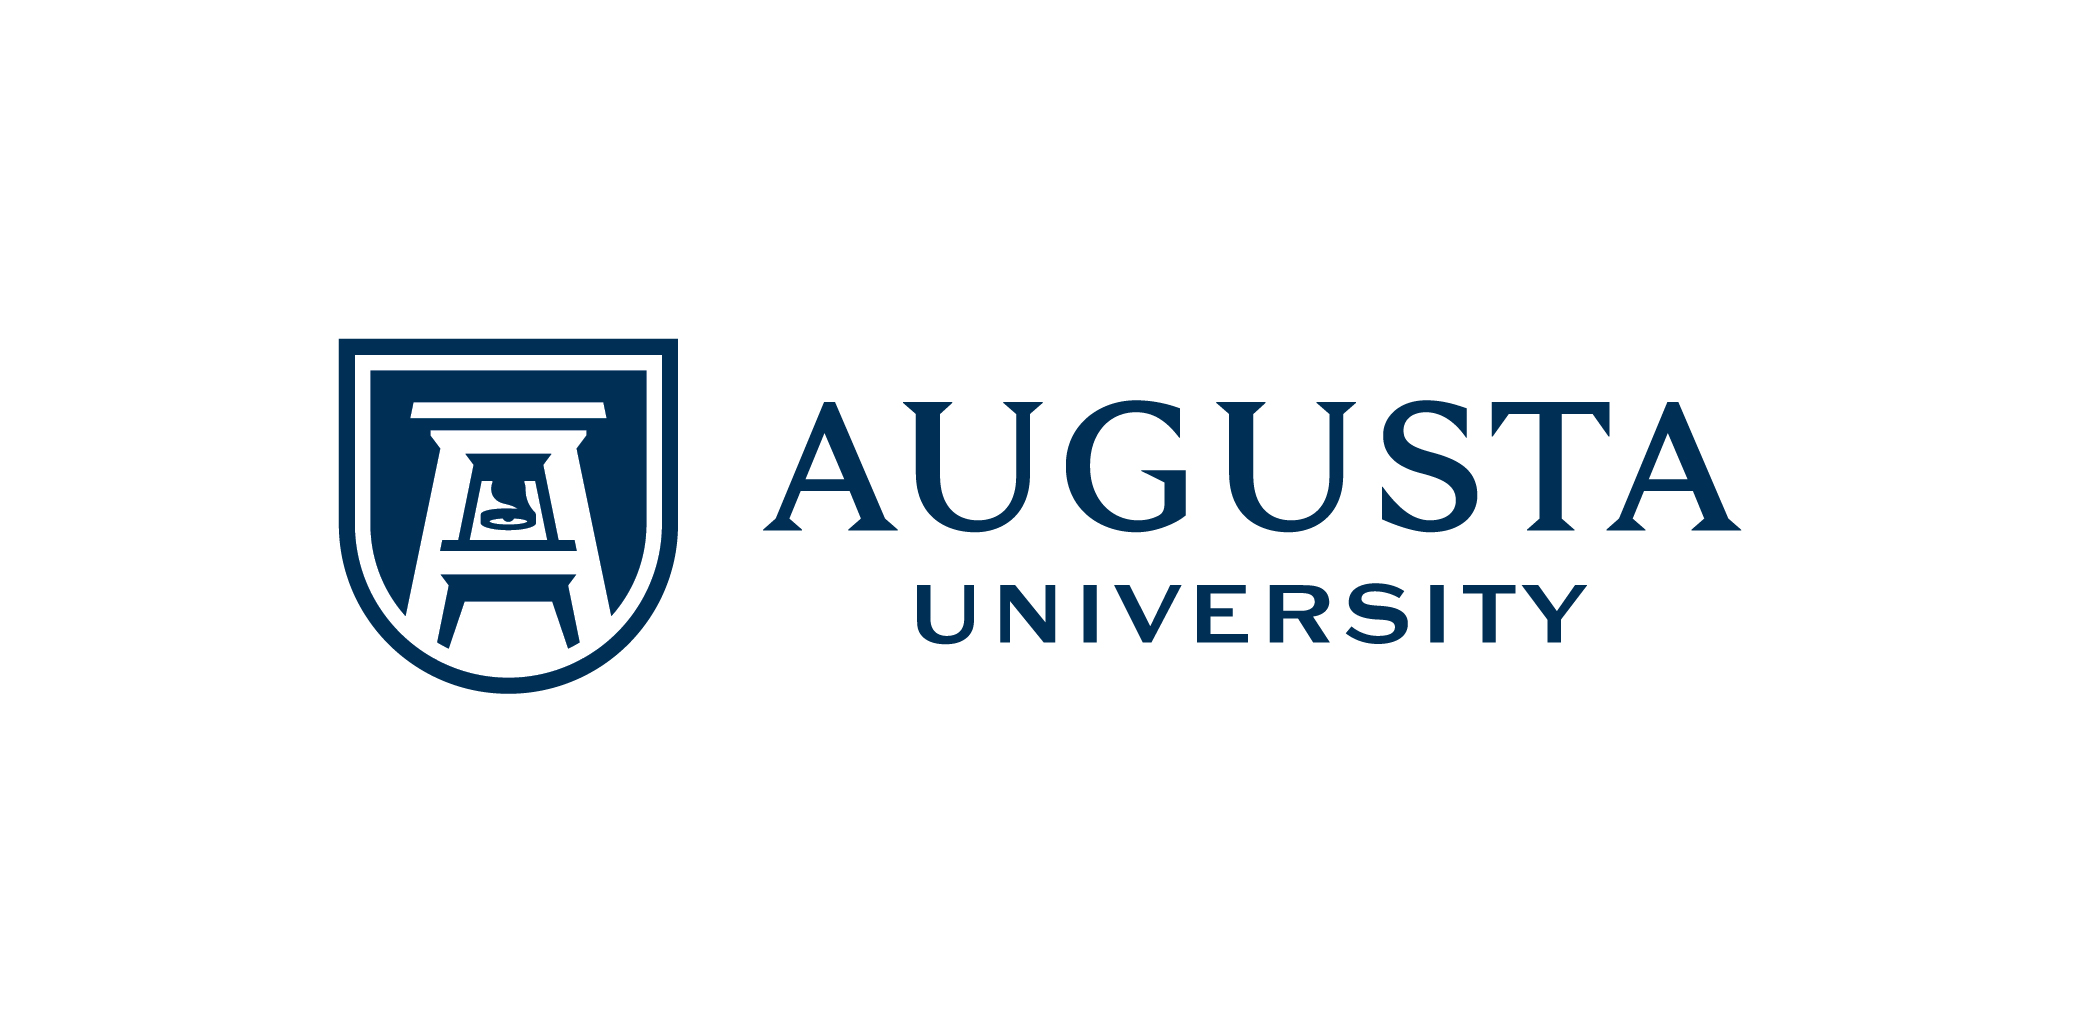 We’re Augusta University now! Studying Cognition as Inference